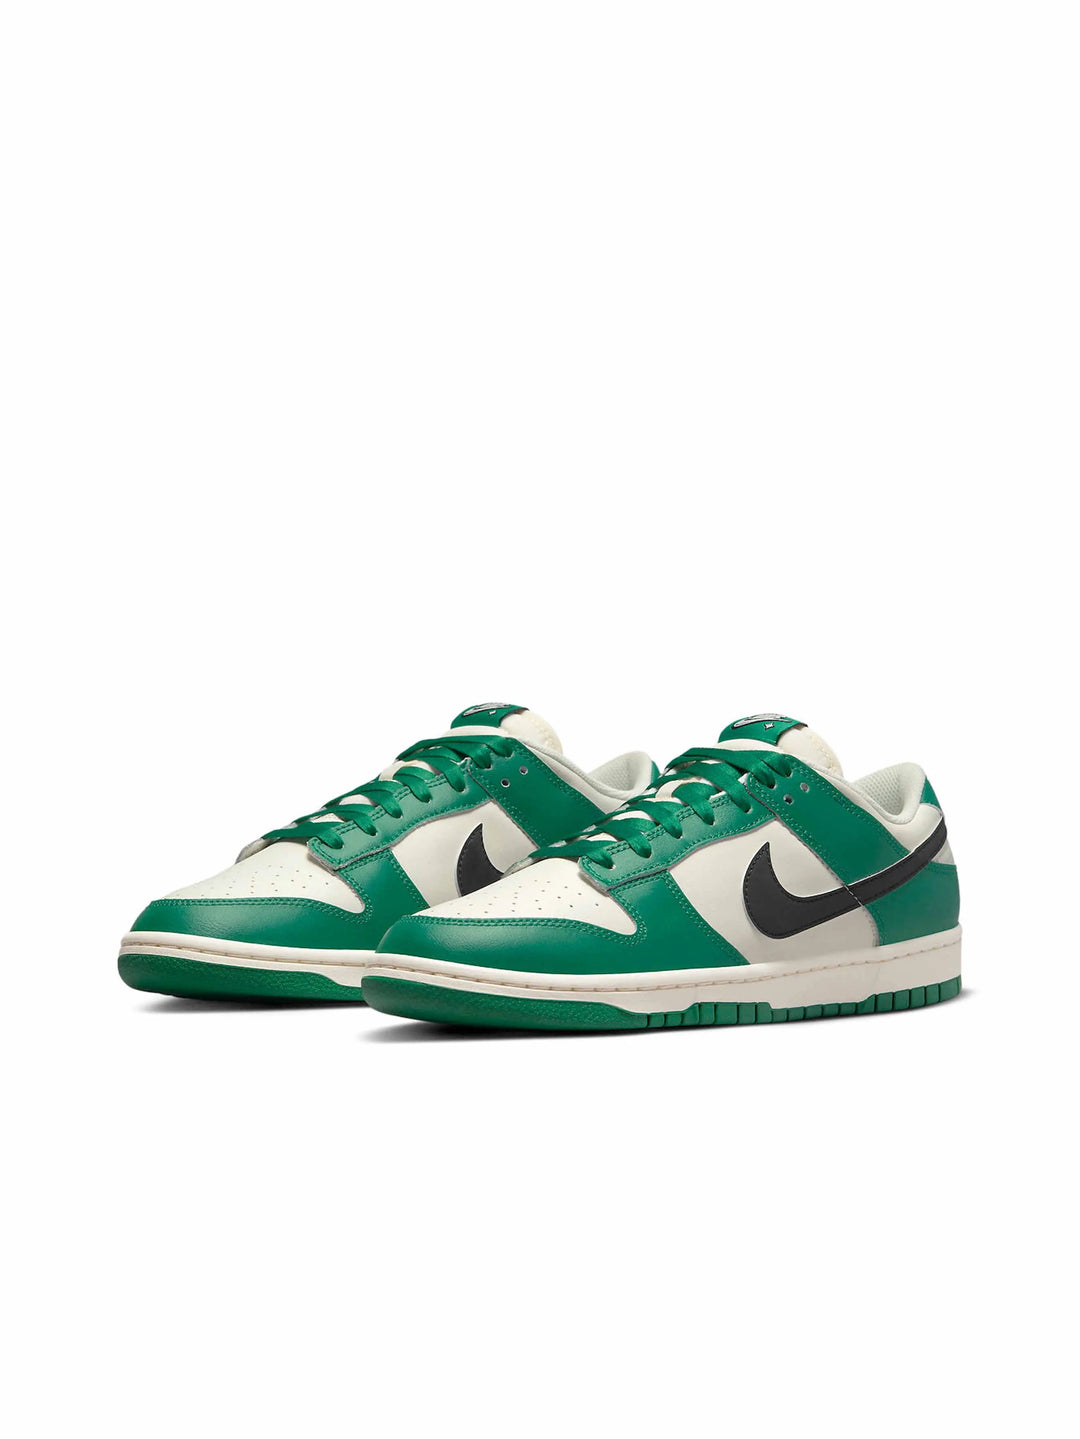 Nike Dunk Low SE Lottery Pack Malachite Green Prior